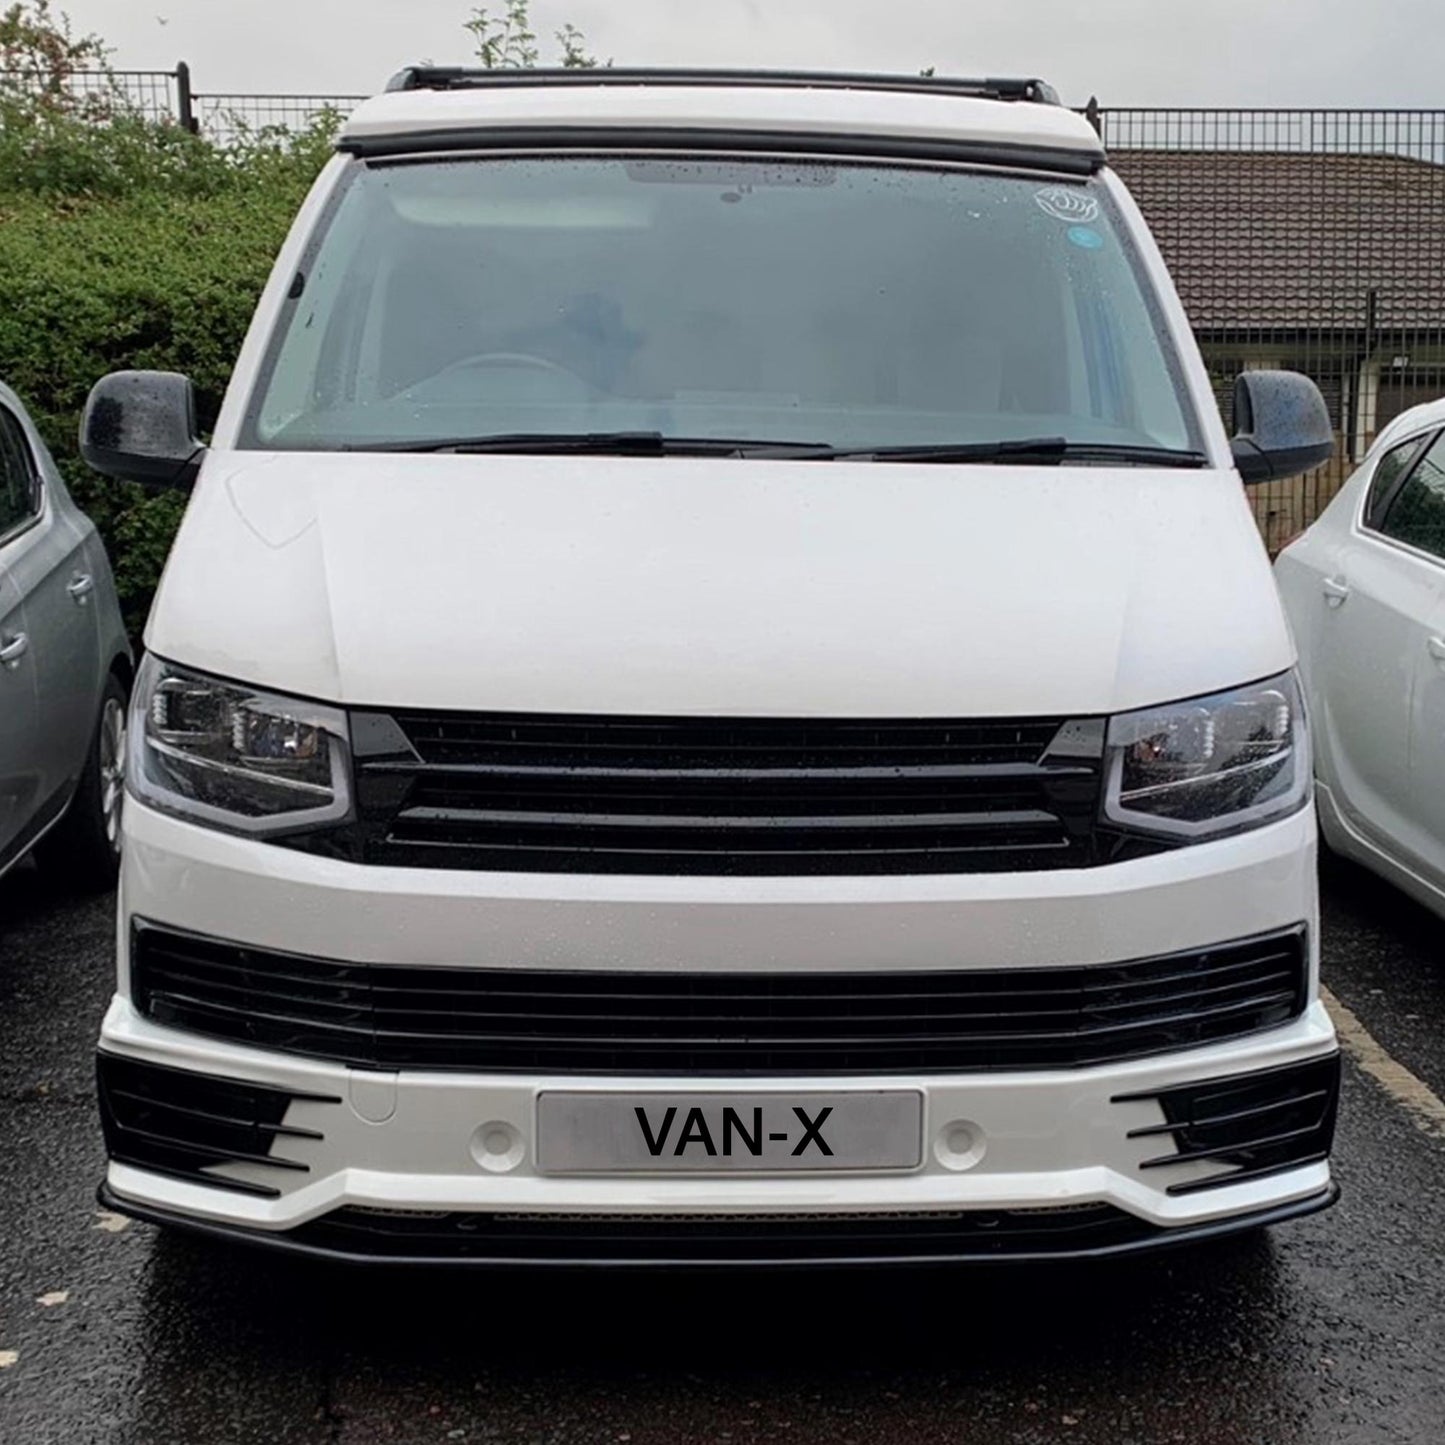 VW T6 Transporter camper van Front Bumper Spoiler + Splitter (B-Grade) Painted and ready to fit in 3 colour options.latest upgrade